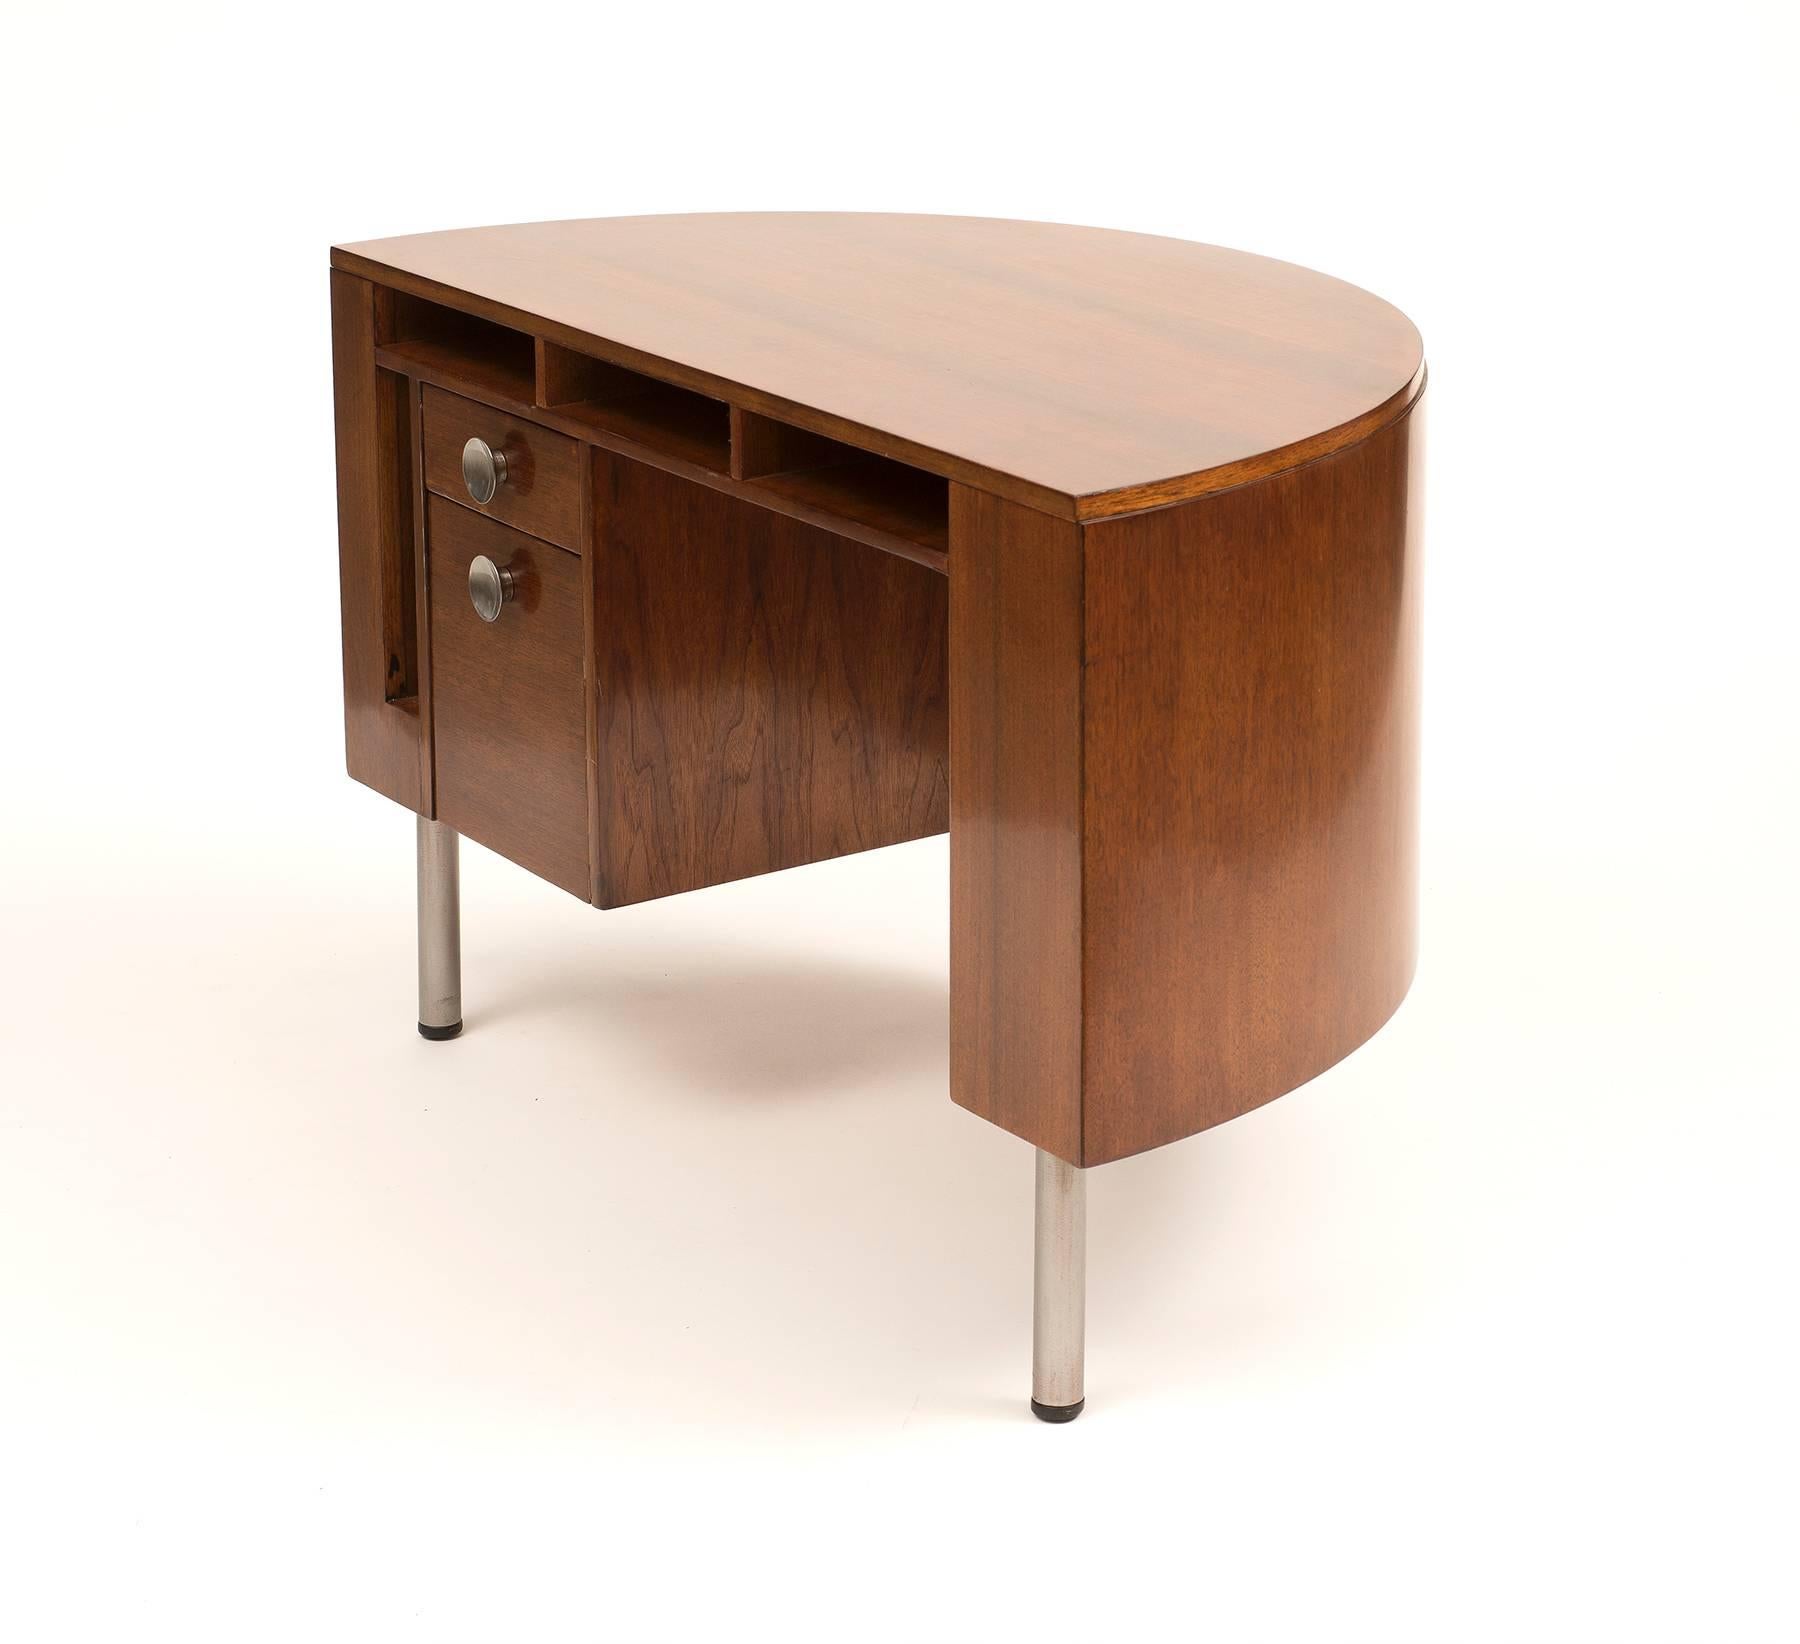 Brushed Art Deco Demilune Desk by Gilbert Rohde in Walnut, 1942